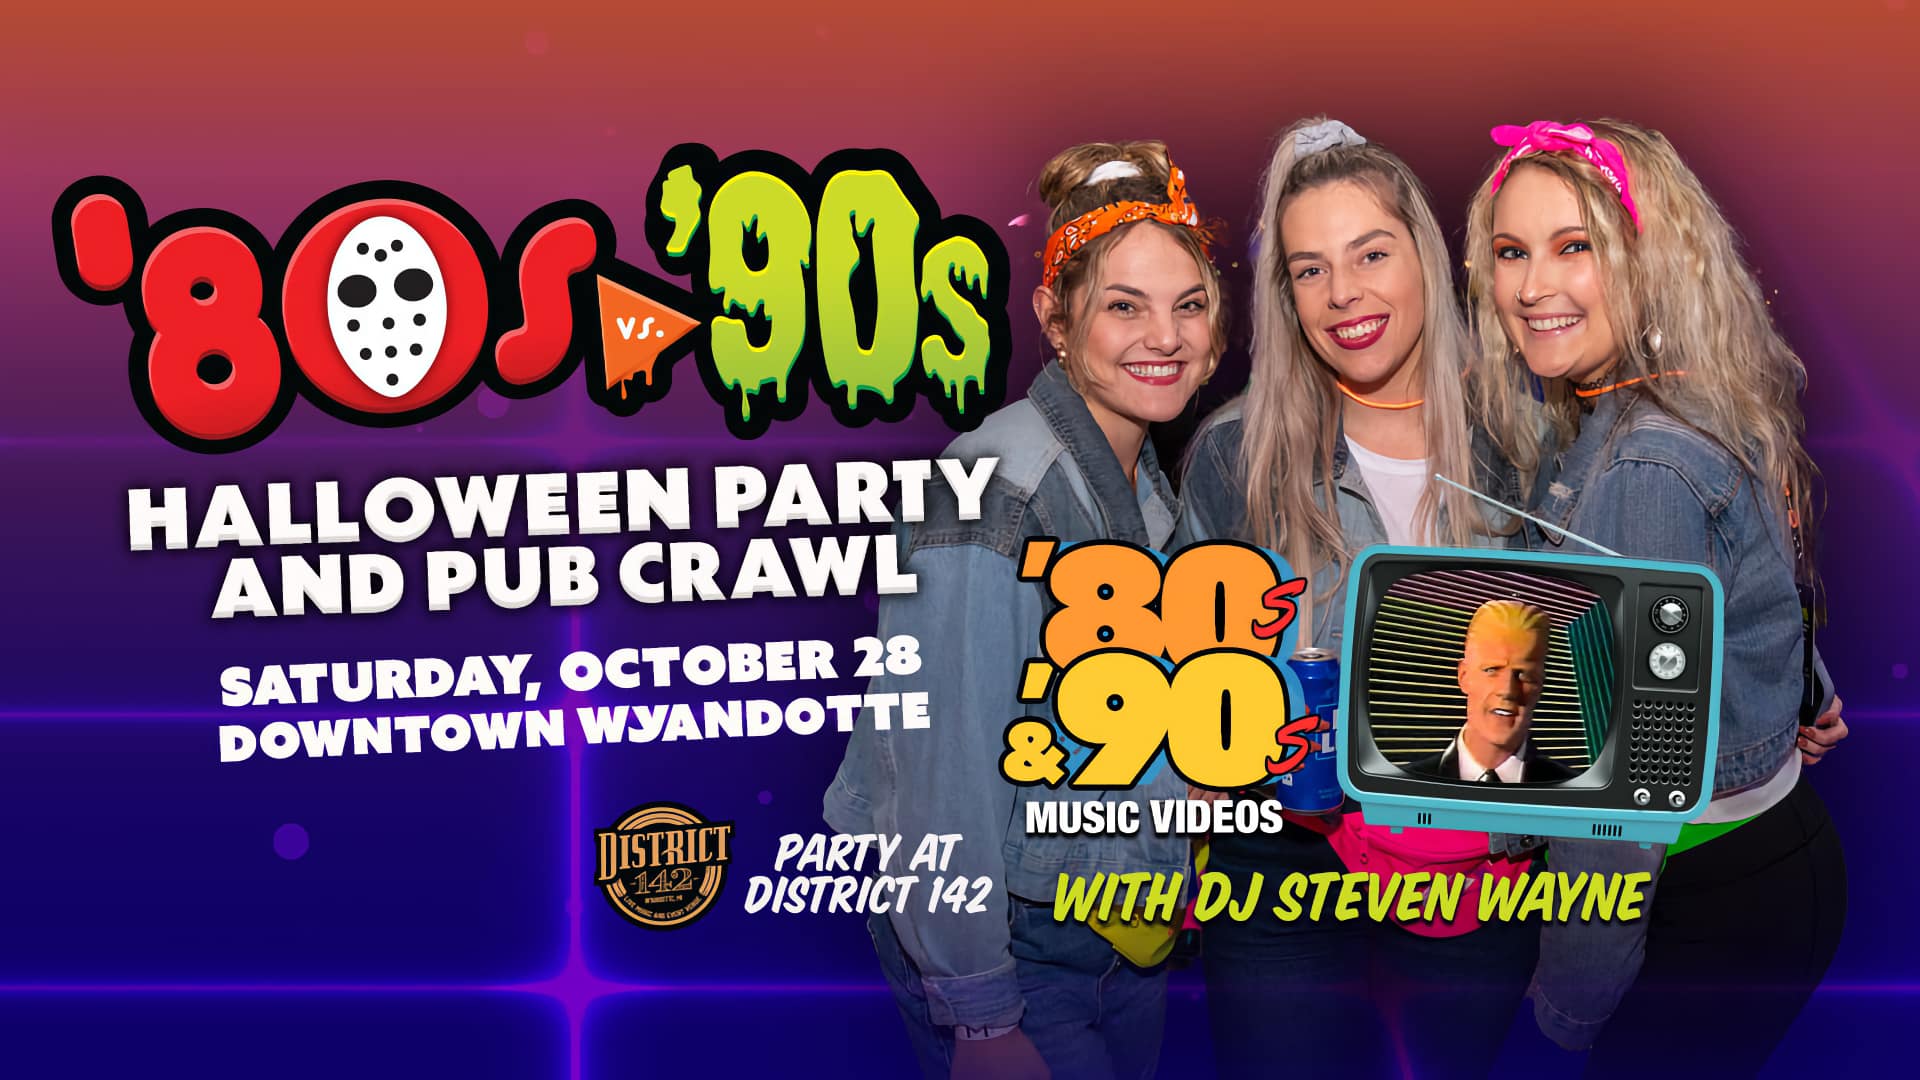 '80s vs. '90s Halloween Party & Pub Crawl on Saturday, October 28 at District 142 with DJ Steven Wayne